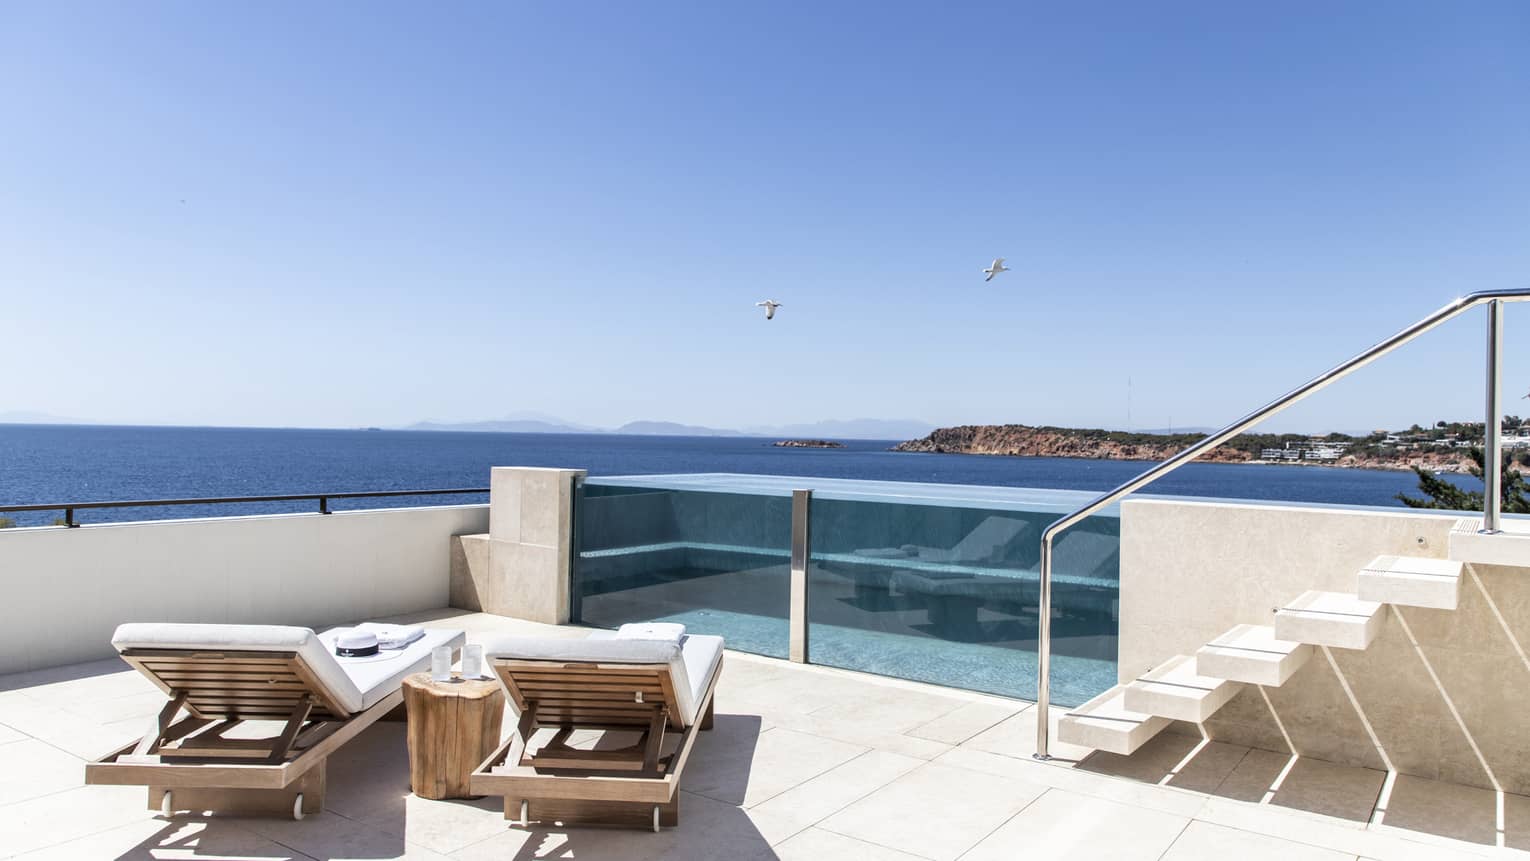 Raised, glass-enclosed pool on a private terrace with two chaise lounges